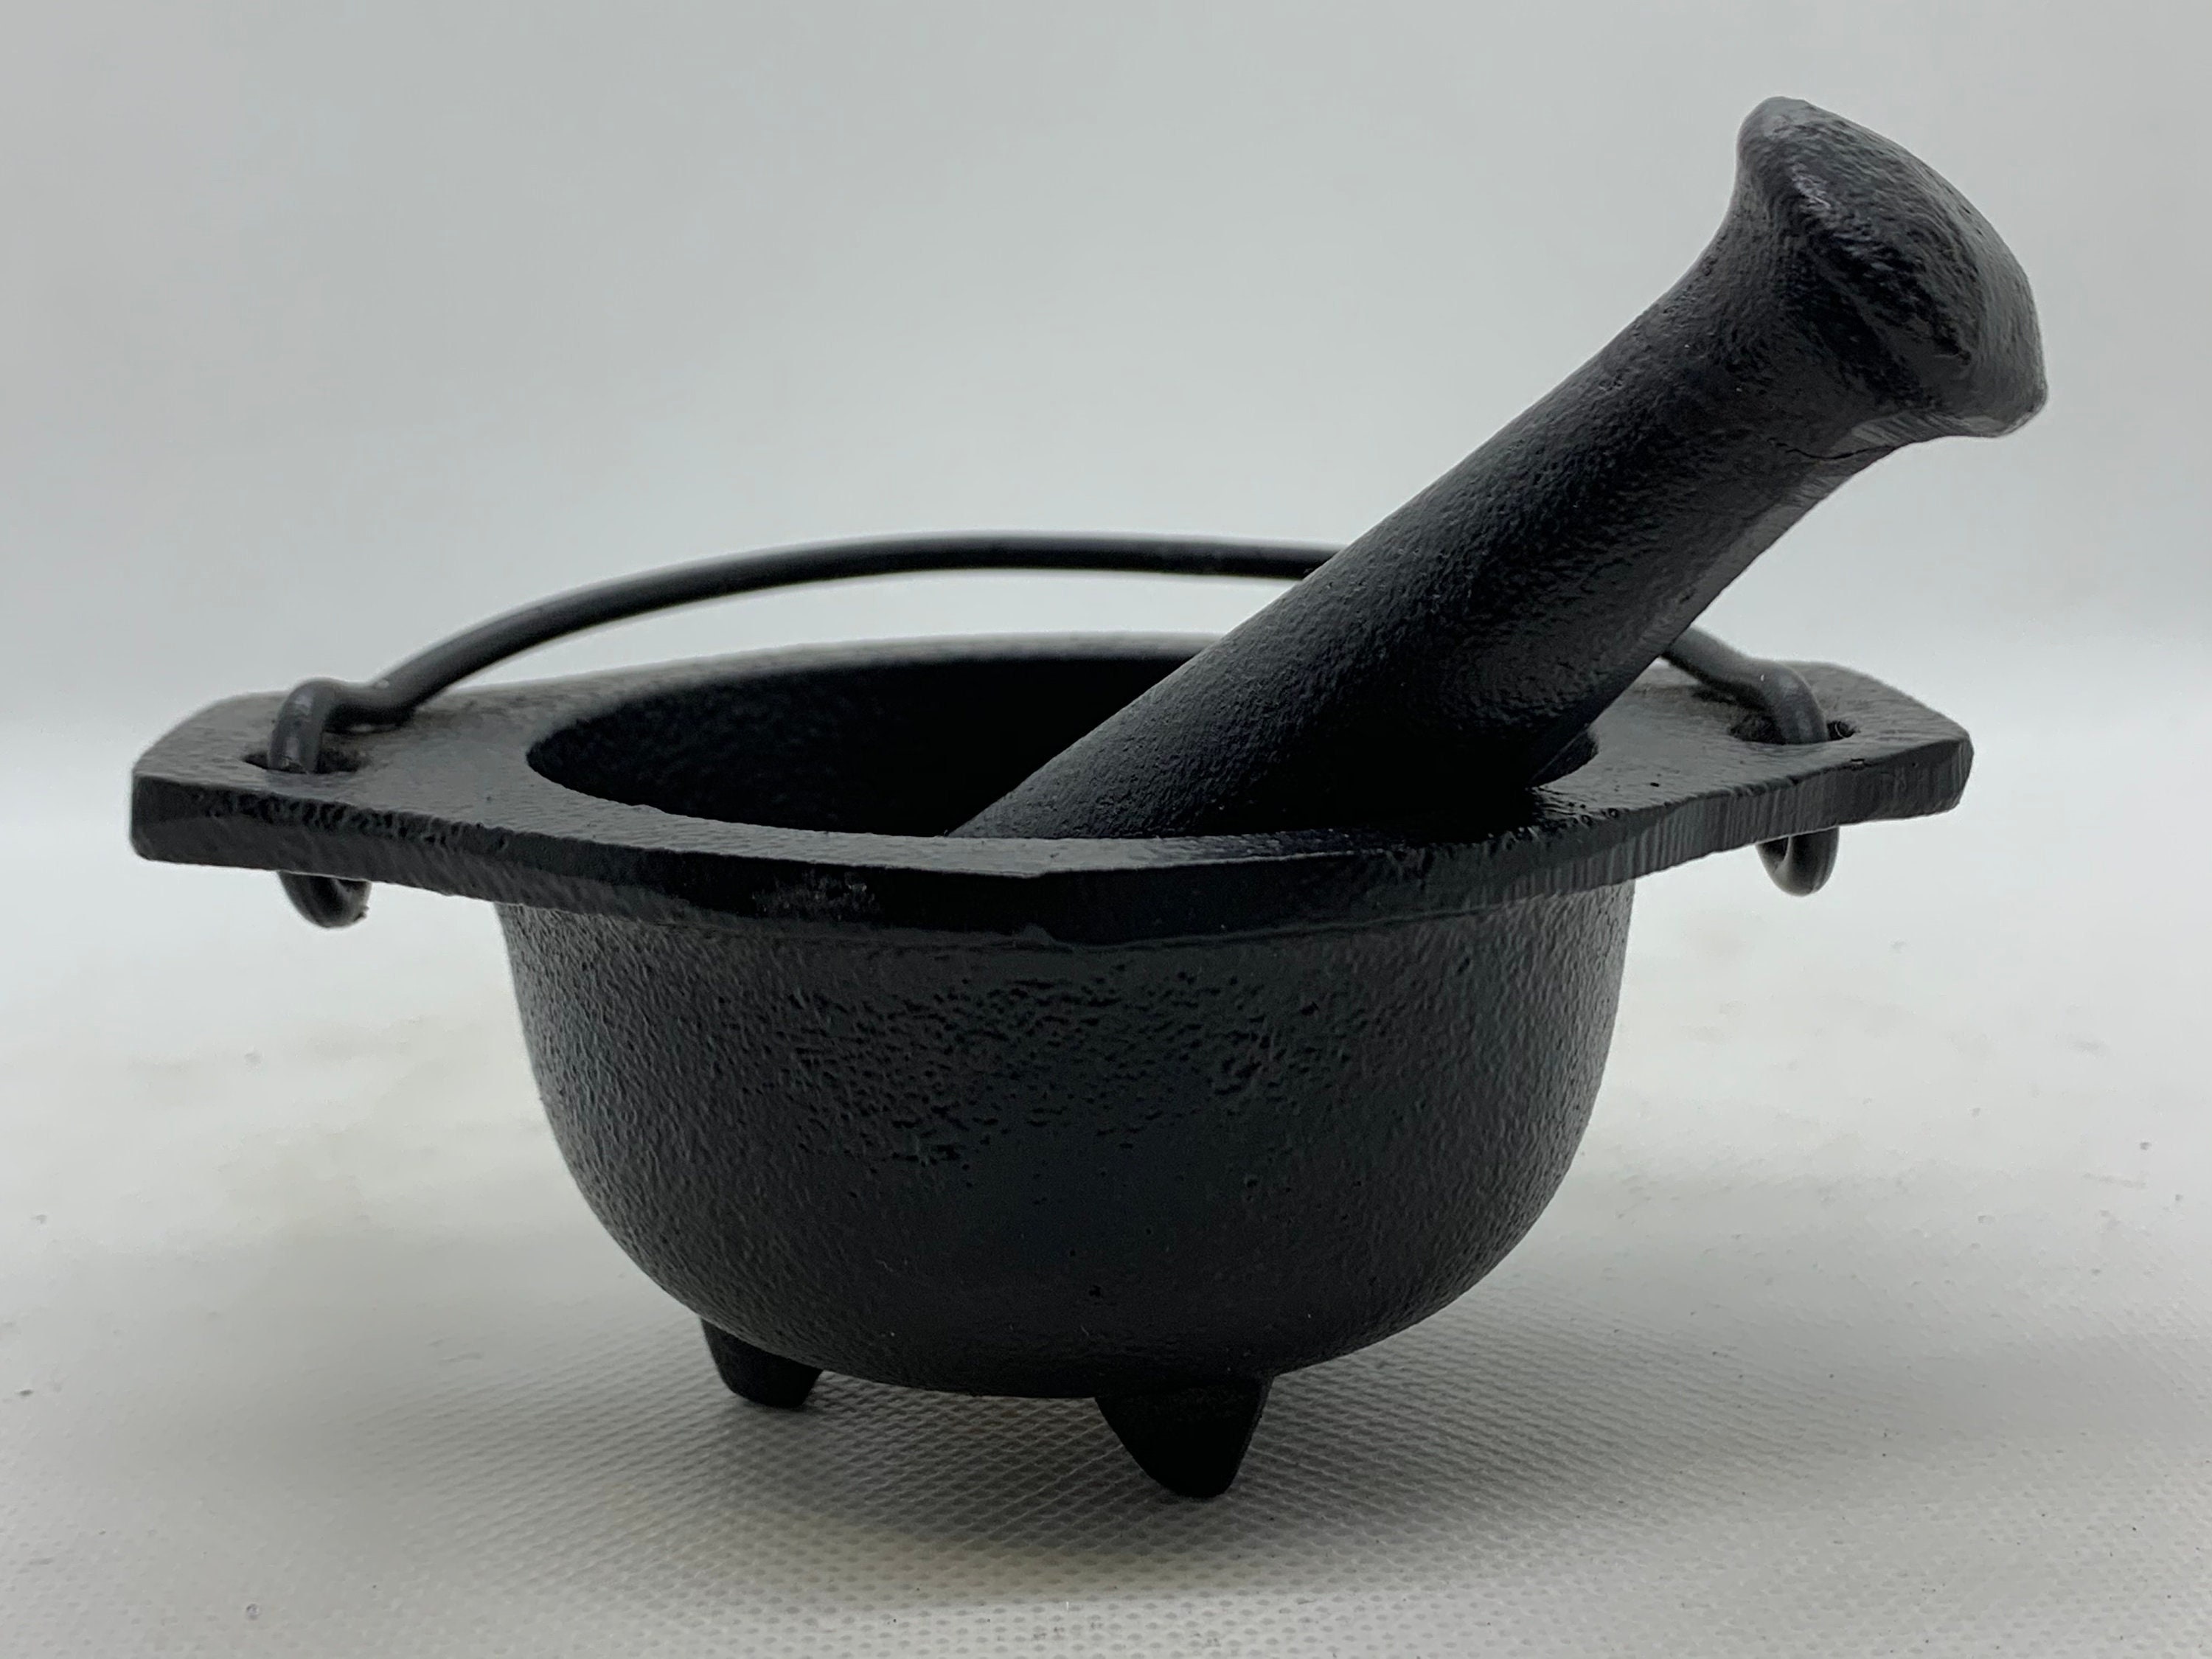  Backcountry Iron 6.25 Inch Heavy Cast Iron Pestle for